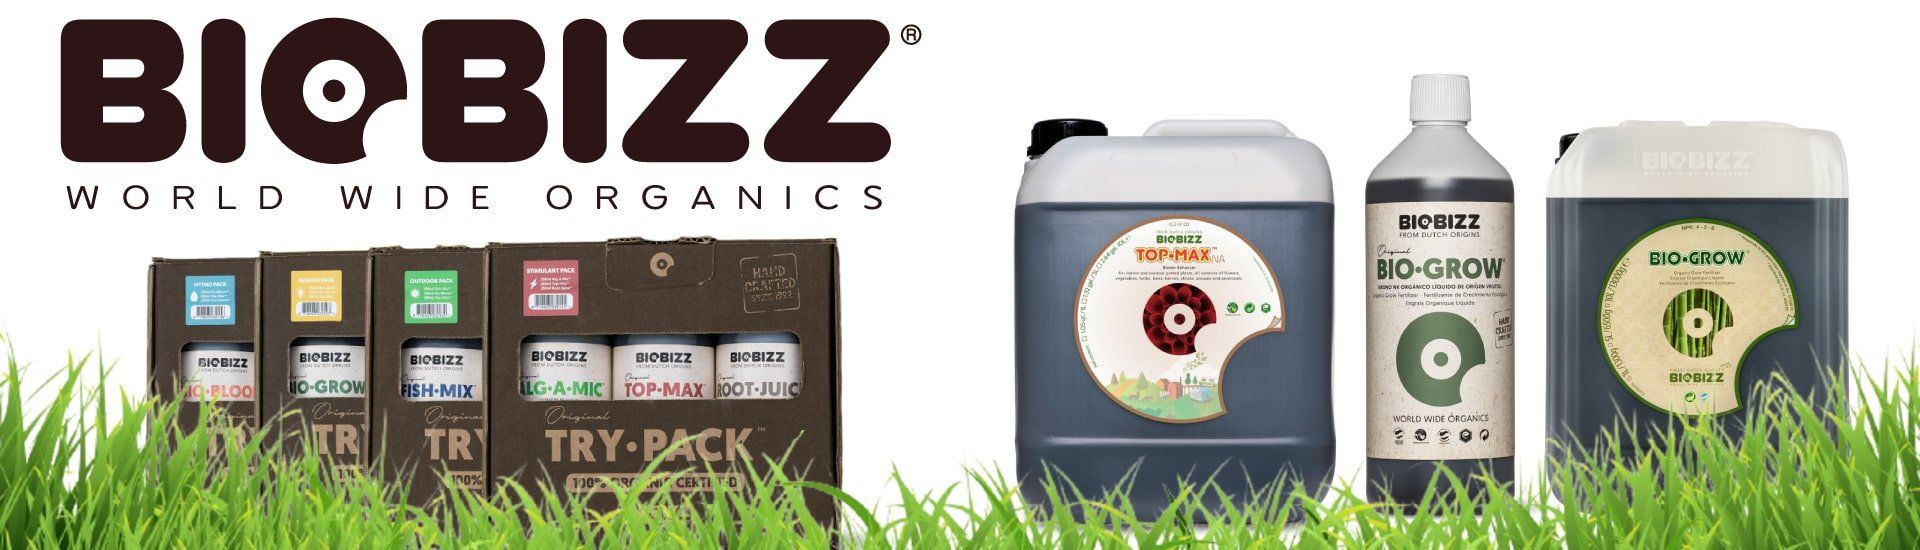 The new Biobizz product image brings the brand to its roots, presenting a mature company and a product that is leader in the organic sector worldwide